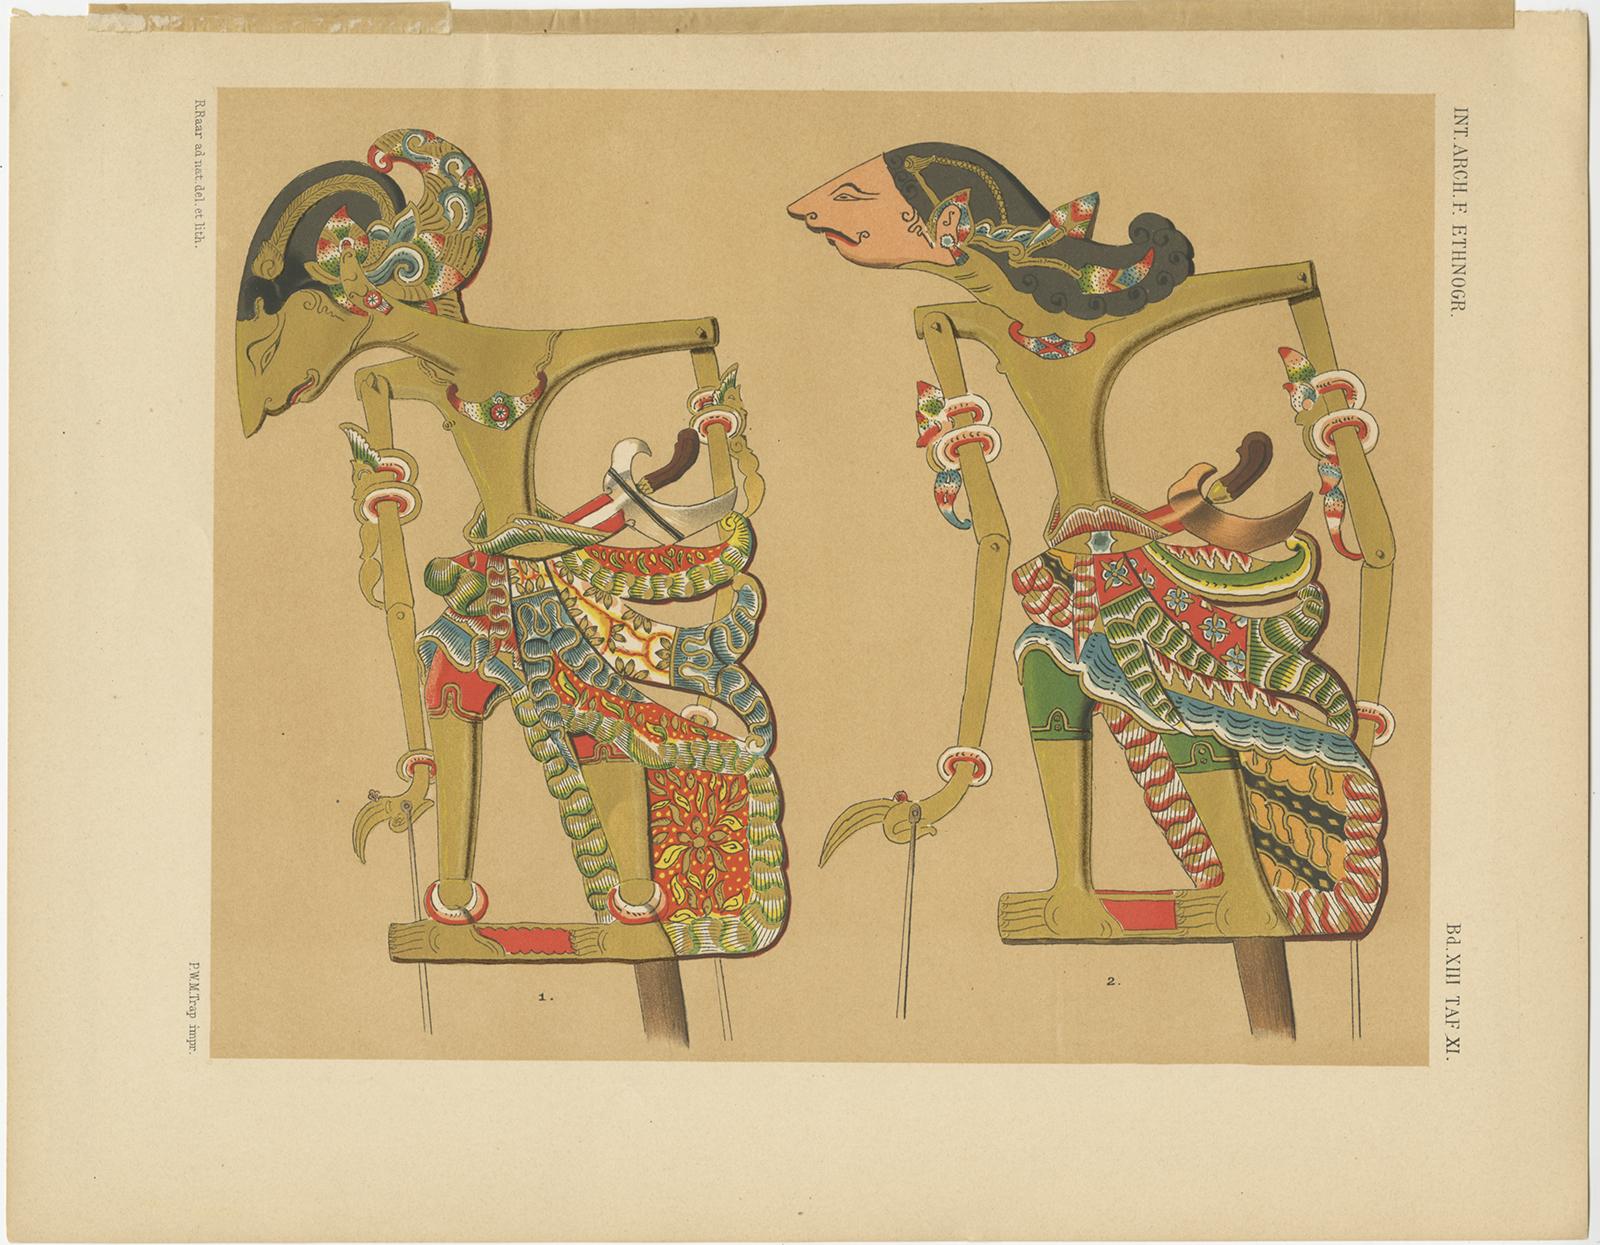 Set of ten antique prints of Wayang puppets, a traditional form of puppet theatre play originally found in the cultures of Java, Indonesia. These prints originate from 'Wajang kêlitik oder kêrutjil' by H.H. Juynboll. Published 1900.